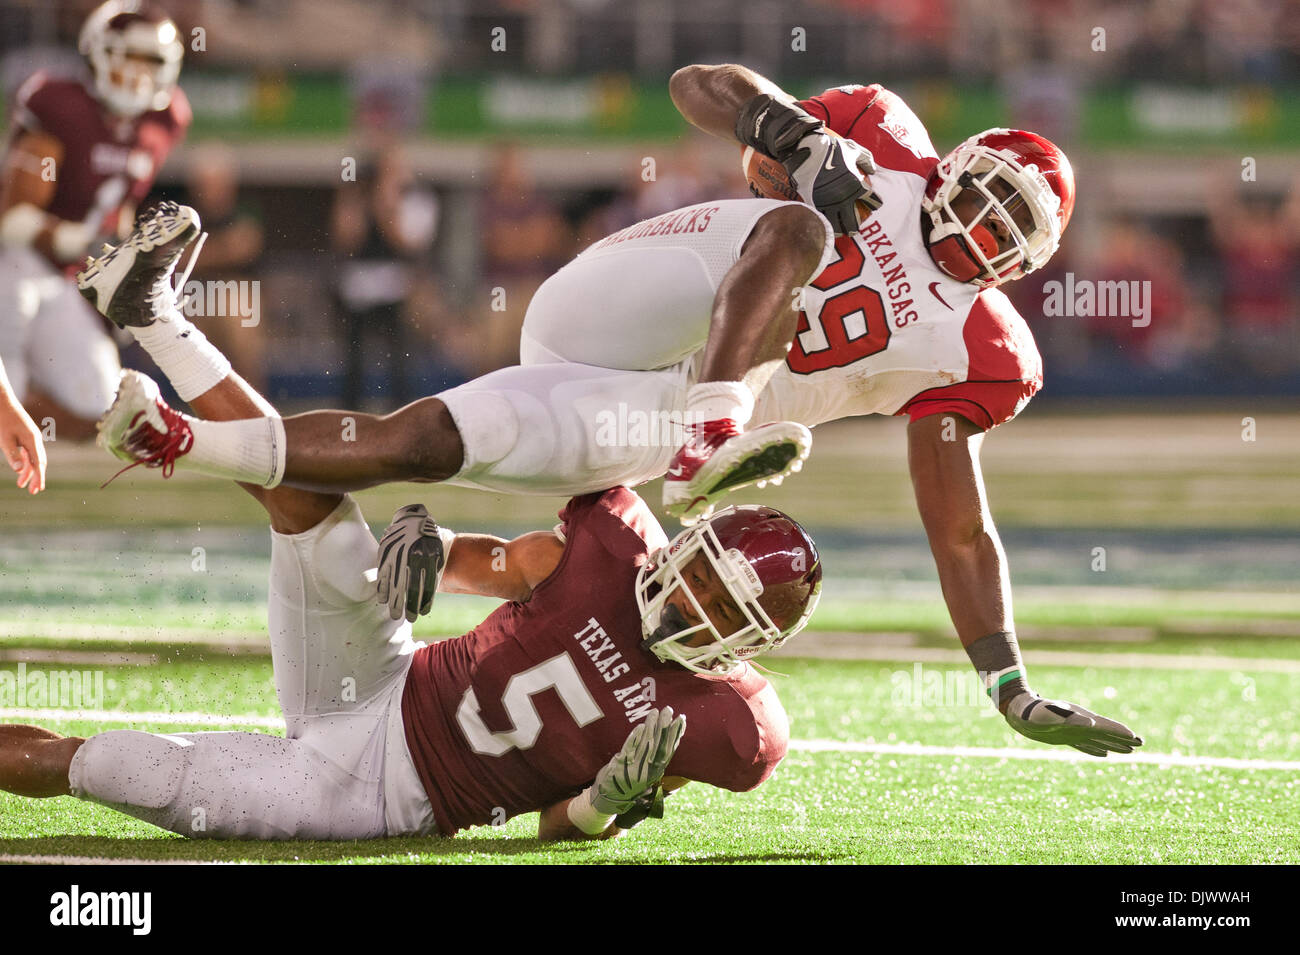 Oct. 11, 2010 - Arlington, Texas, United States of America - Arkansas Razorbacks running back Broderick Green (29) stretches for a first down over Texas A&M Aggies cornerback Coryell Judie (5)during the game between the University of Arkansas and Texas A&M. The Razorbacks defeated the Aggies 24-17 at Cowboys Stadium in Arlington, Texas. (Credit Image: © Jerome Miron/Southcreek Glob Stock Photo